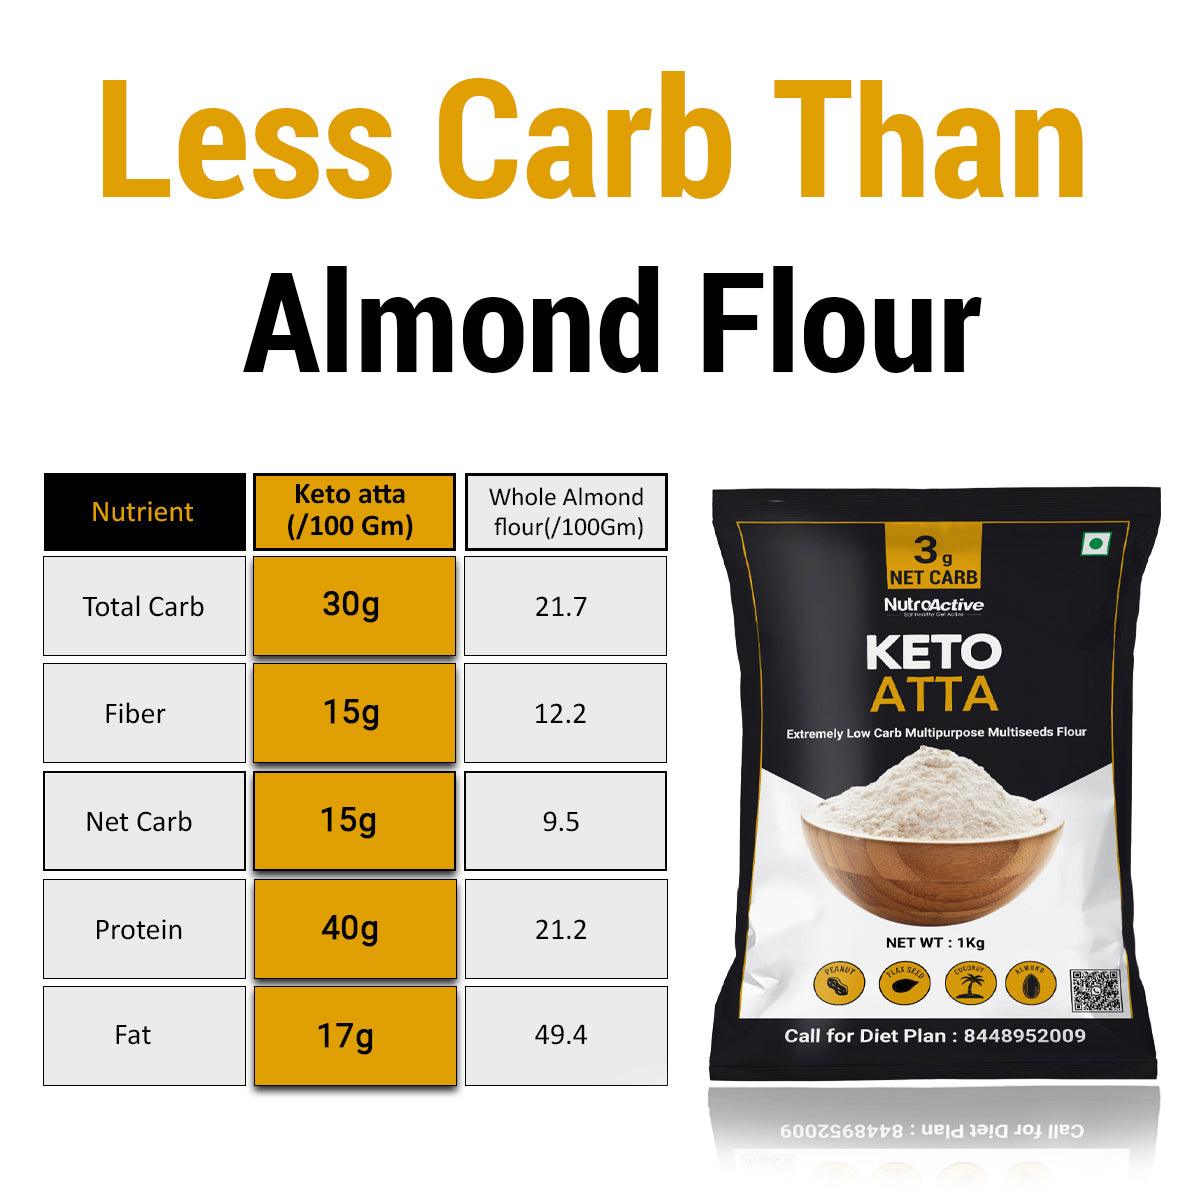 NutroActive Keto Atta Net Carb 3g Extremely Low Carb Flour - Diabexy